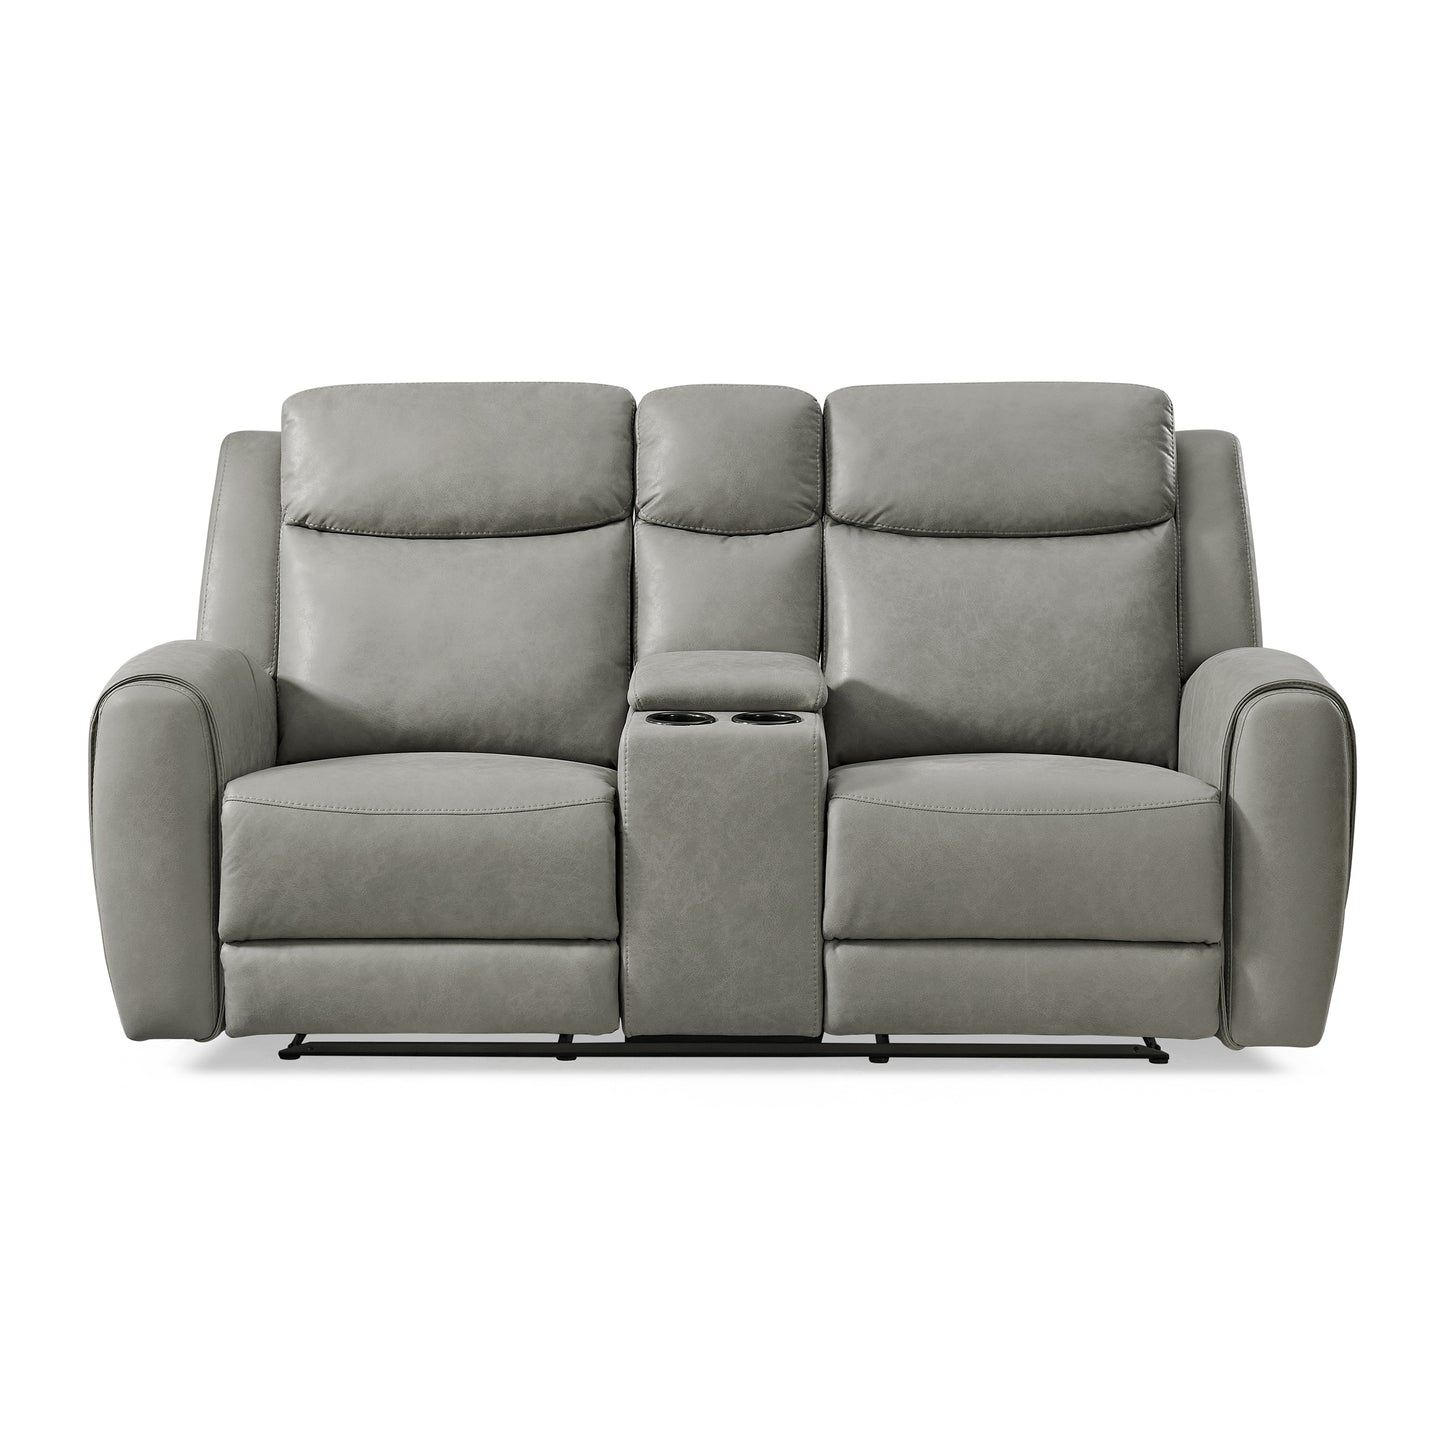 Wesley Transitional Manual Reclining Loveseat, with Cup holders, Gray